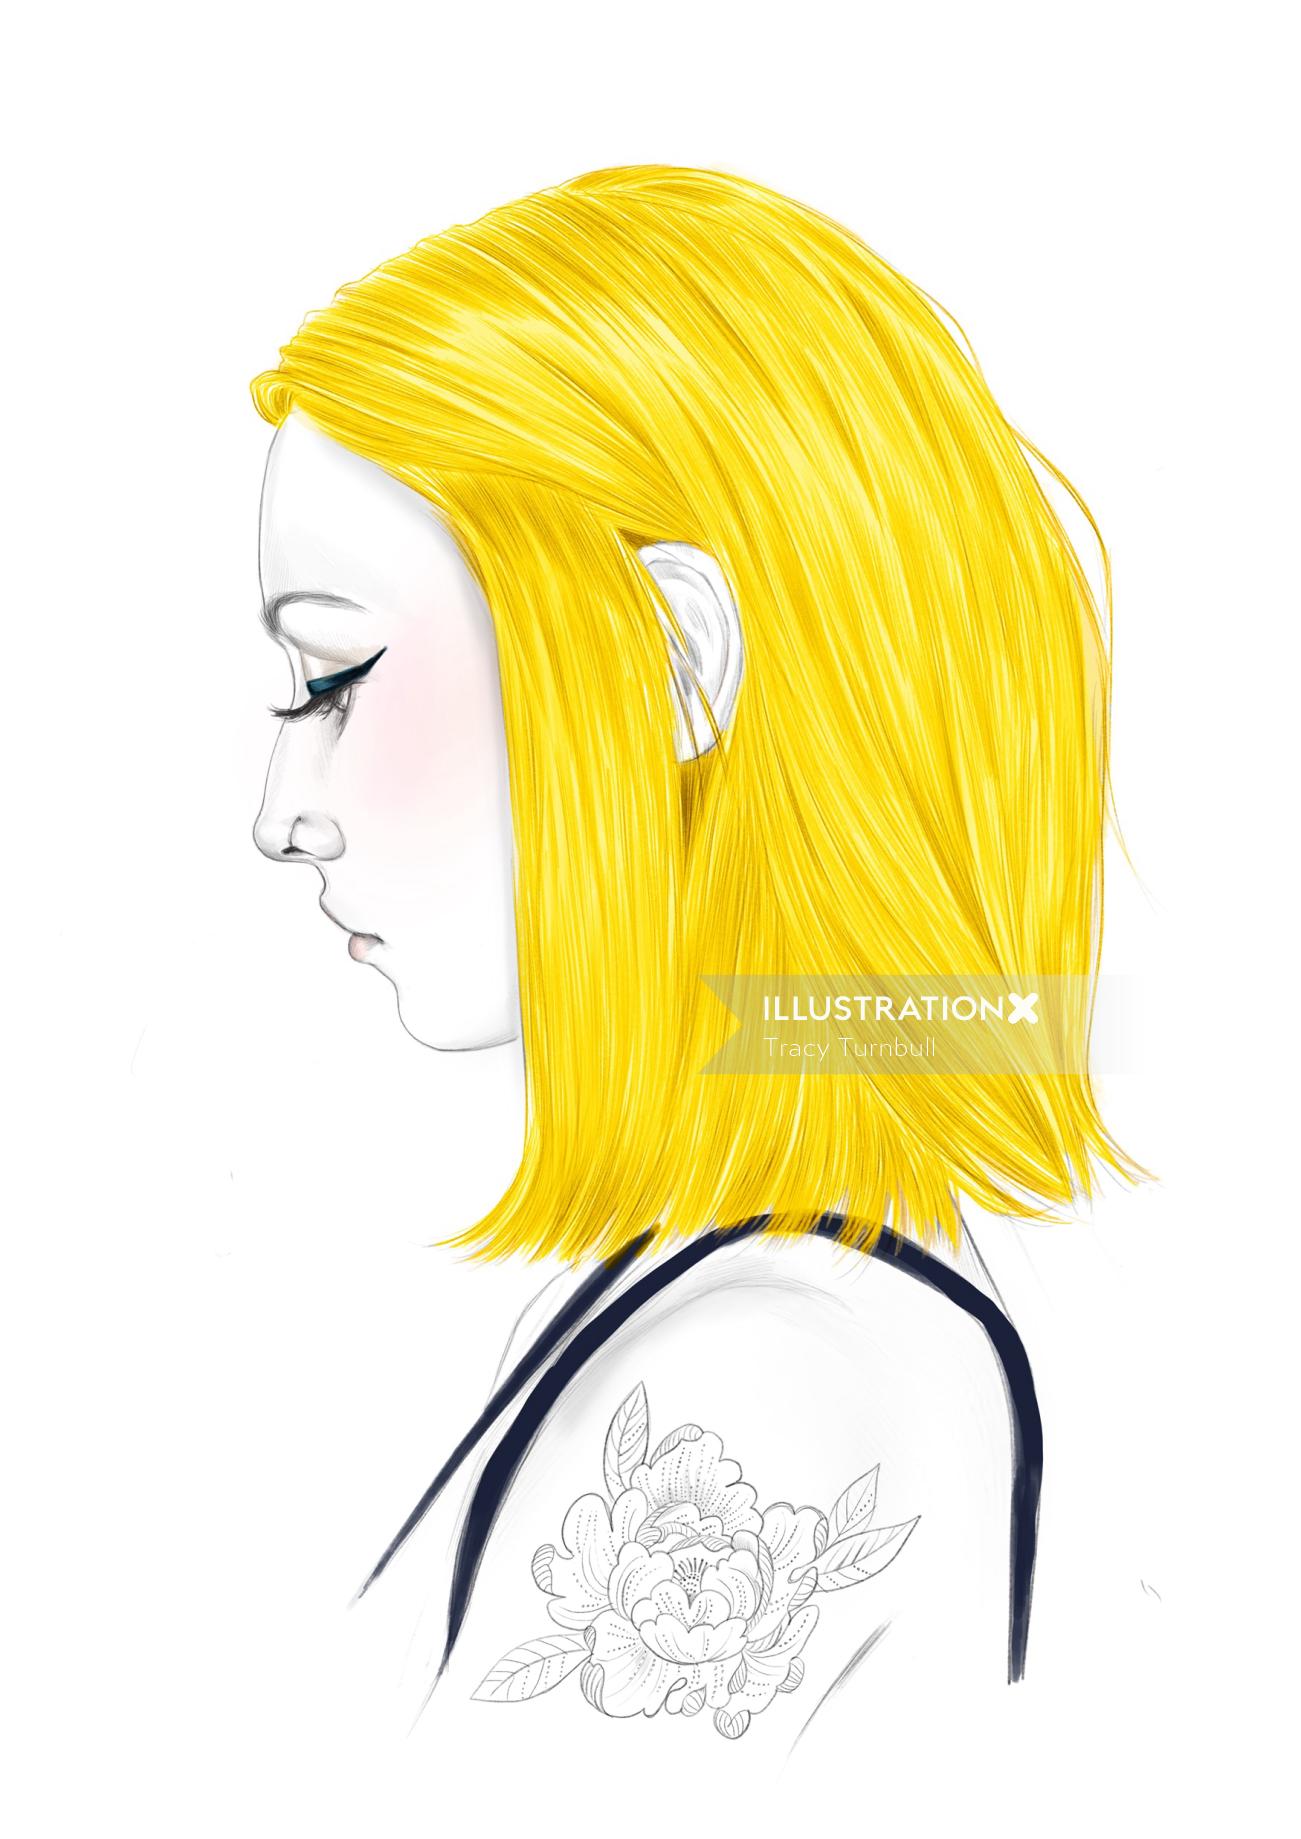 Golden hair color editorial illustration for wella Professional